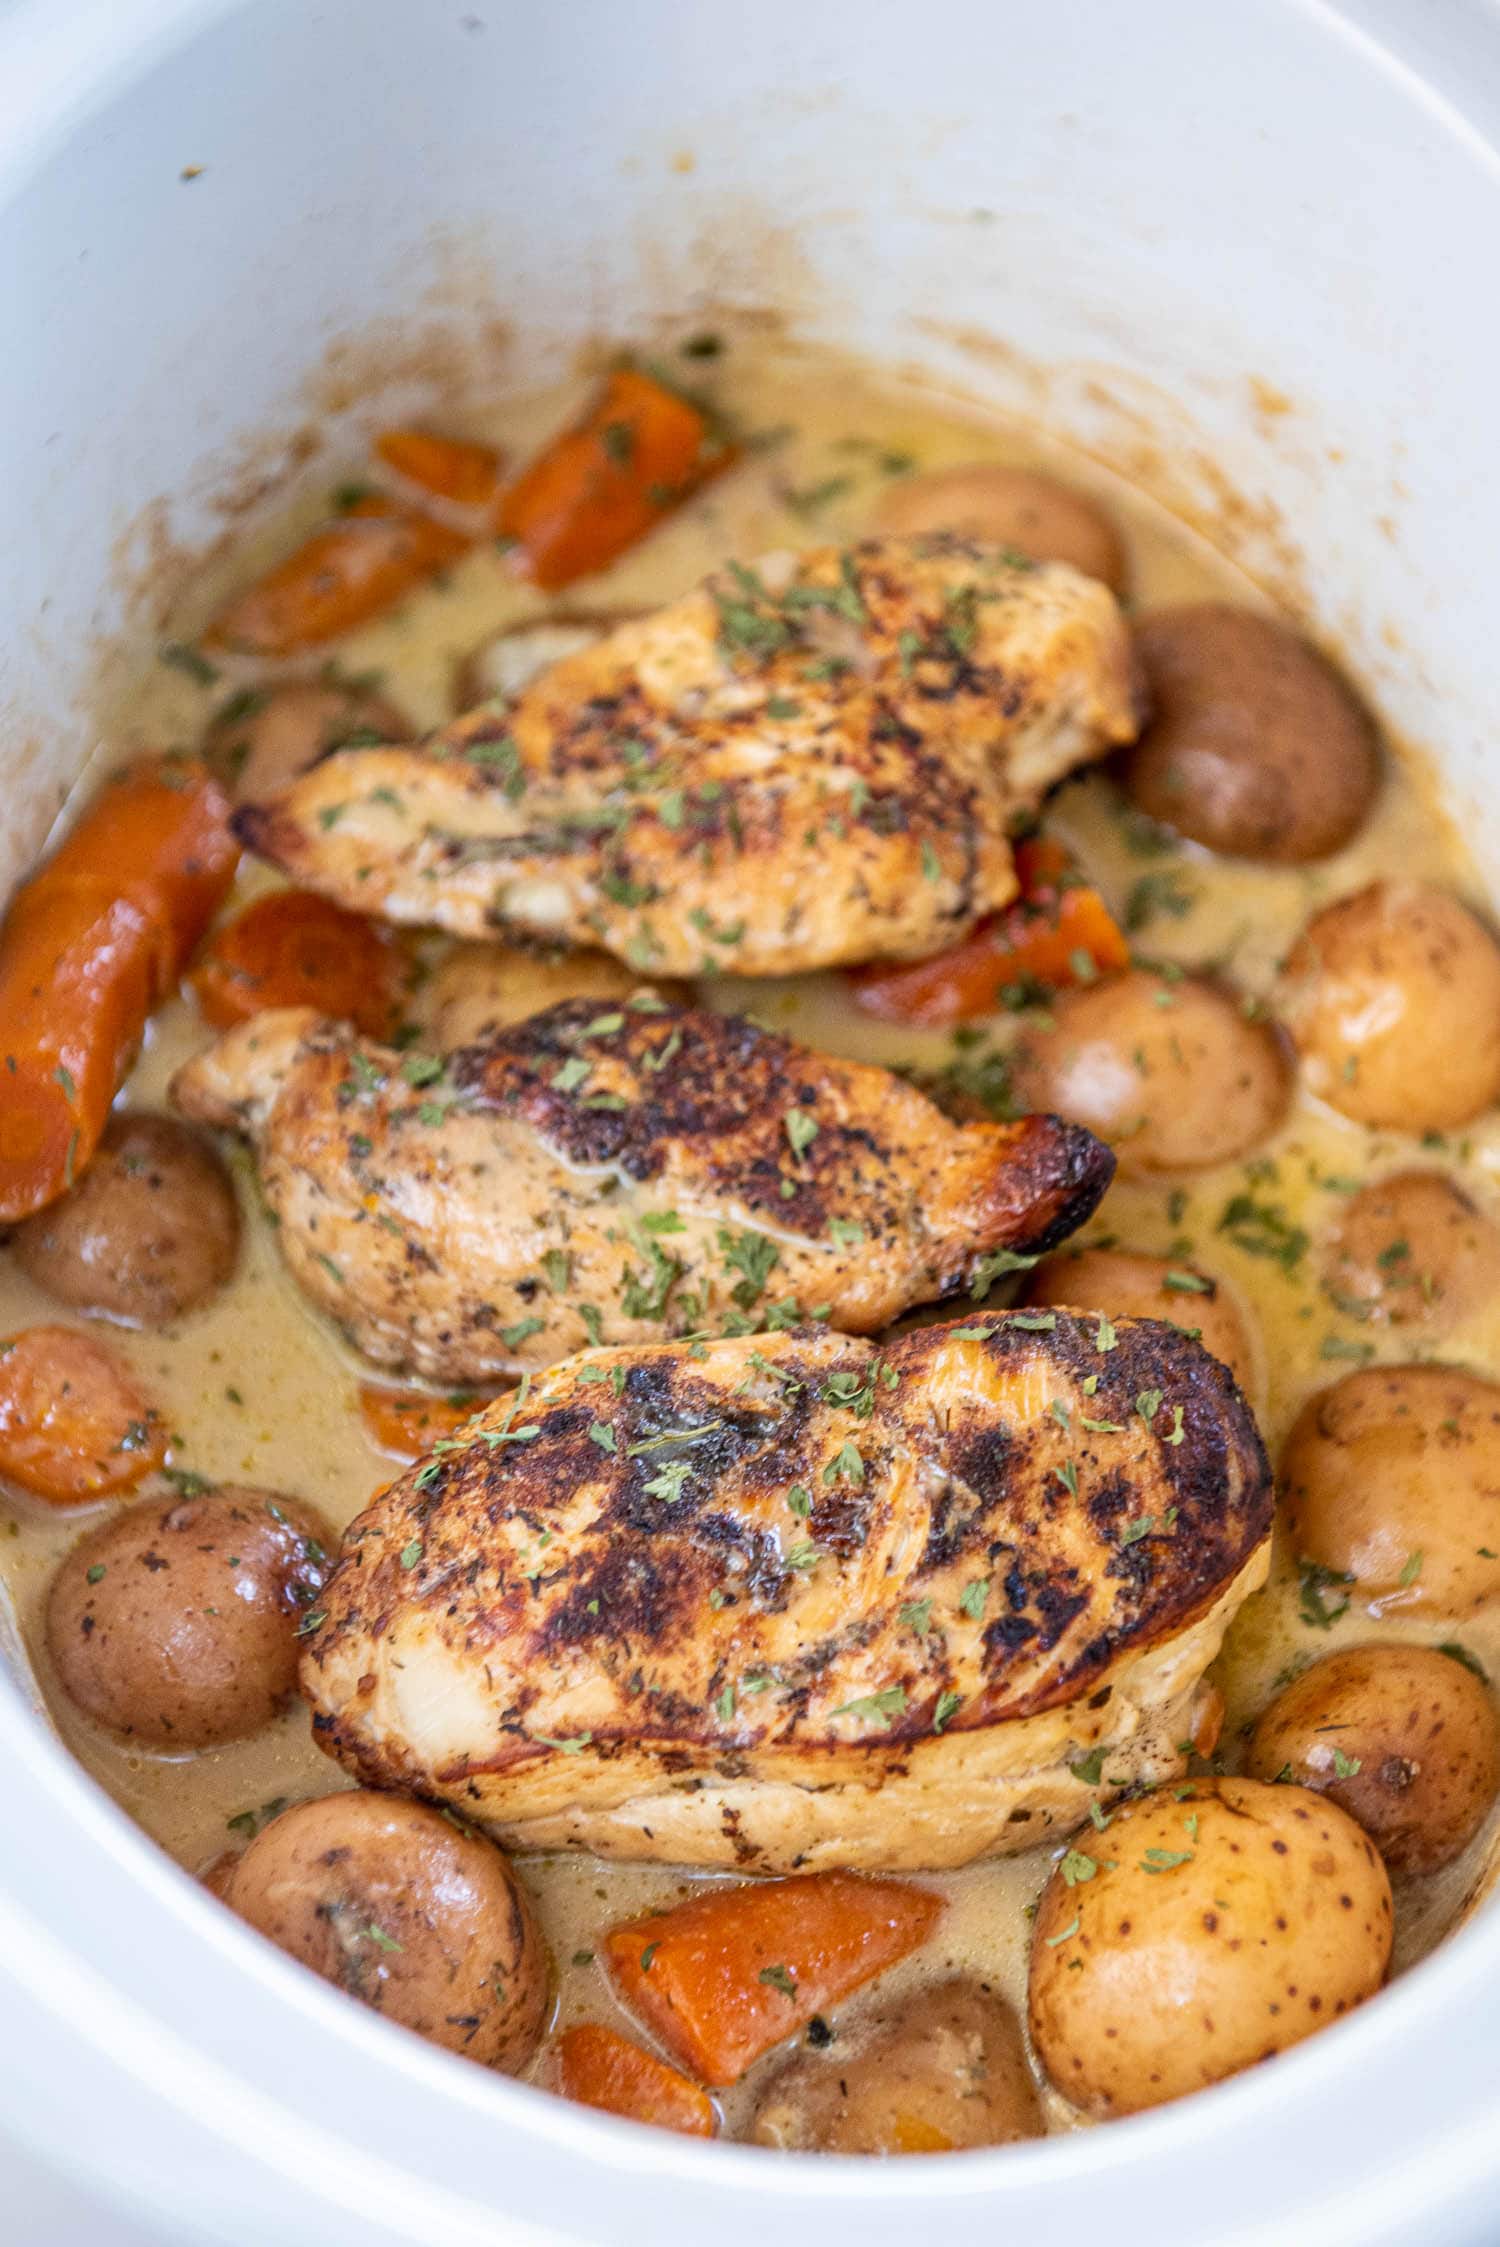 white slow cooker with cooked baby potatoes, carrot chunks, chicken breasts and gravy